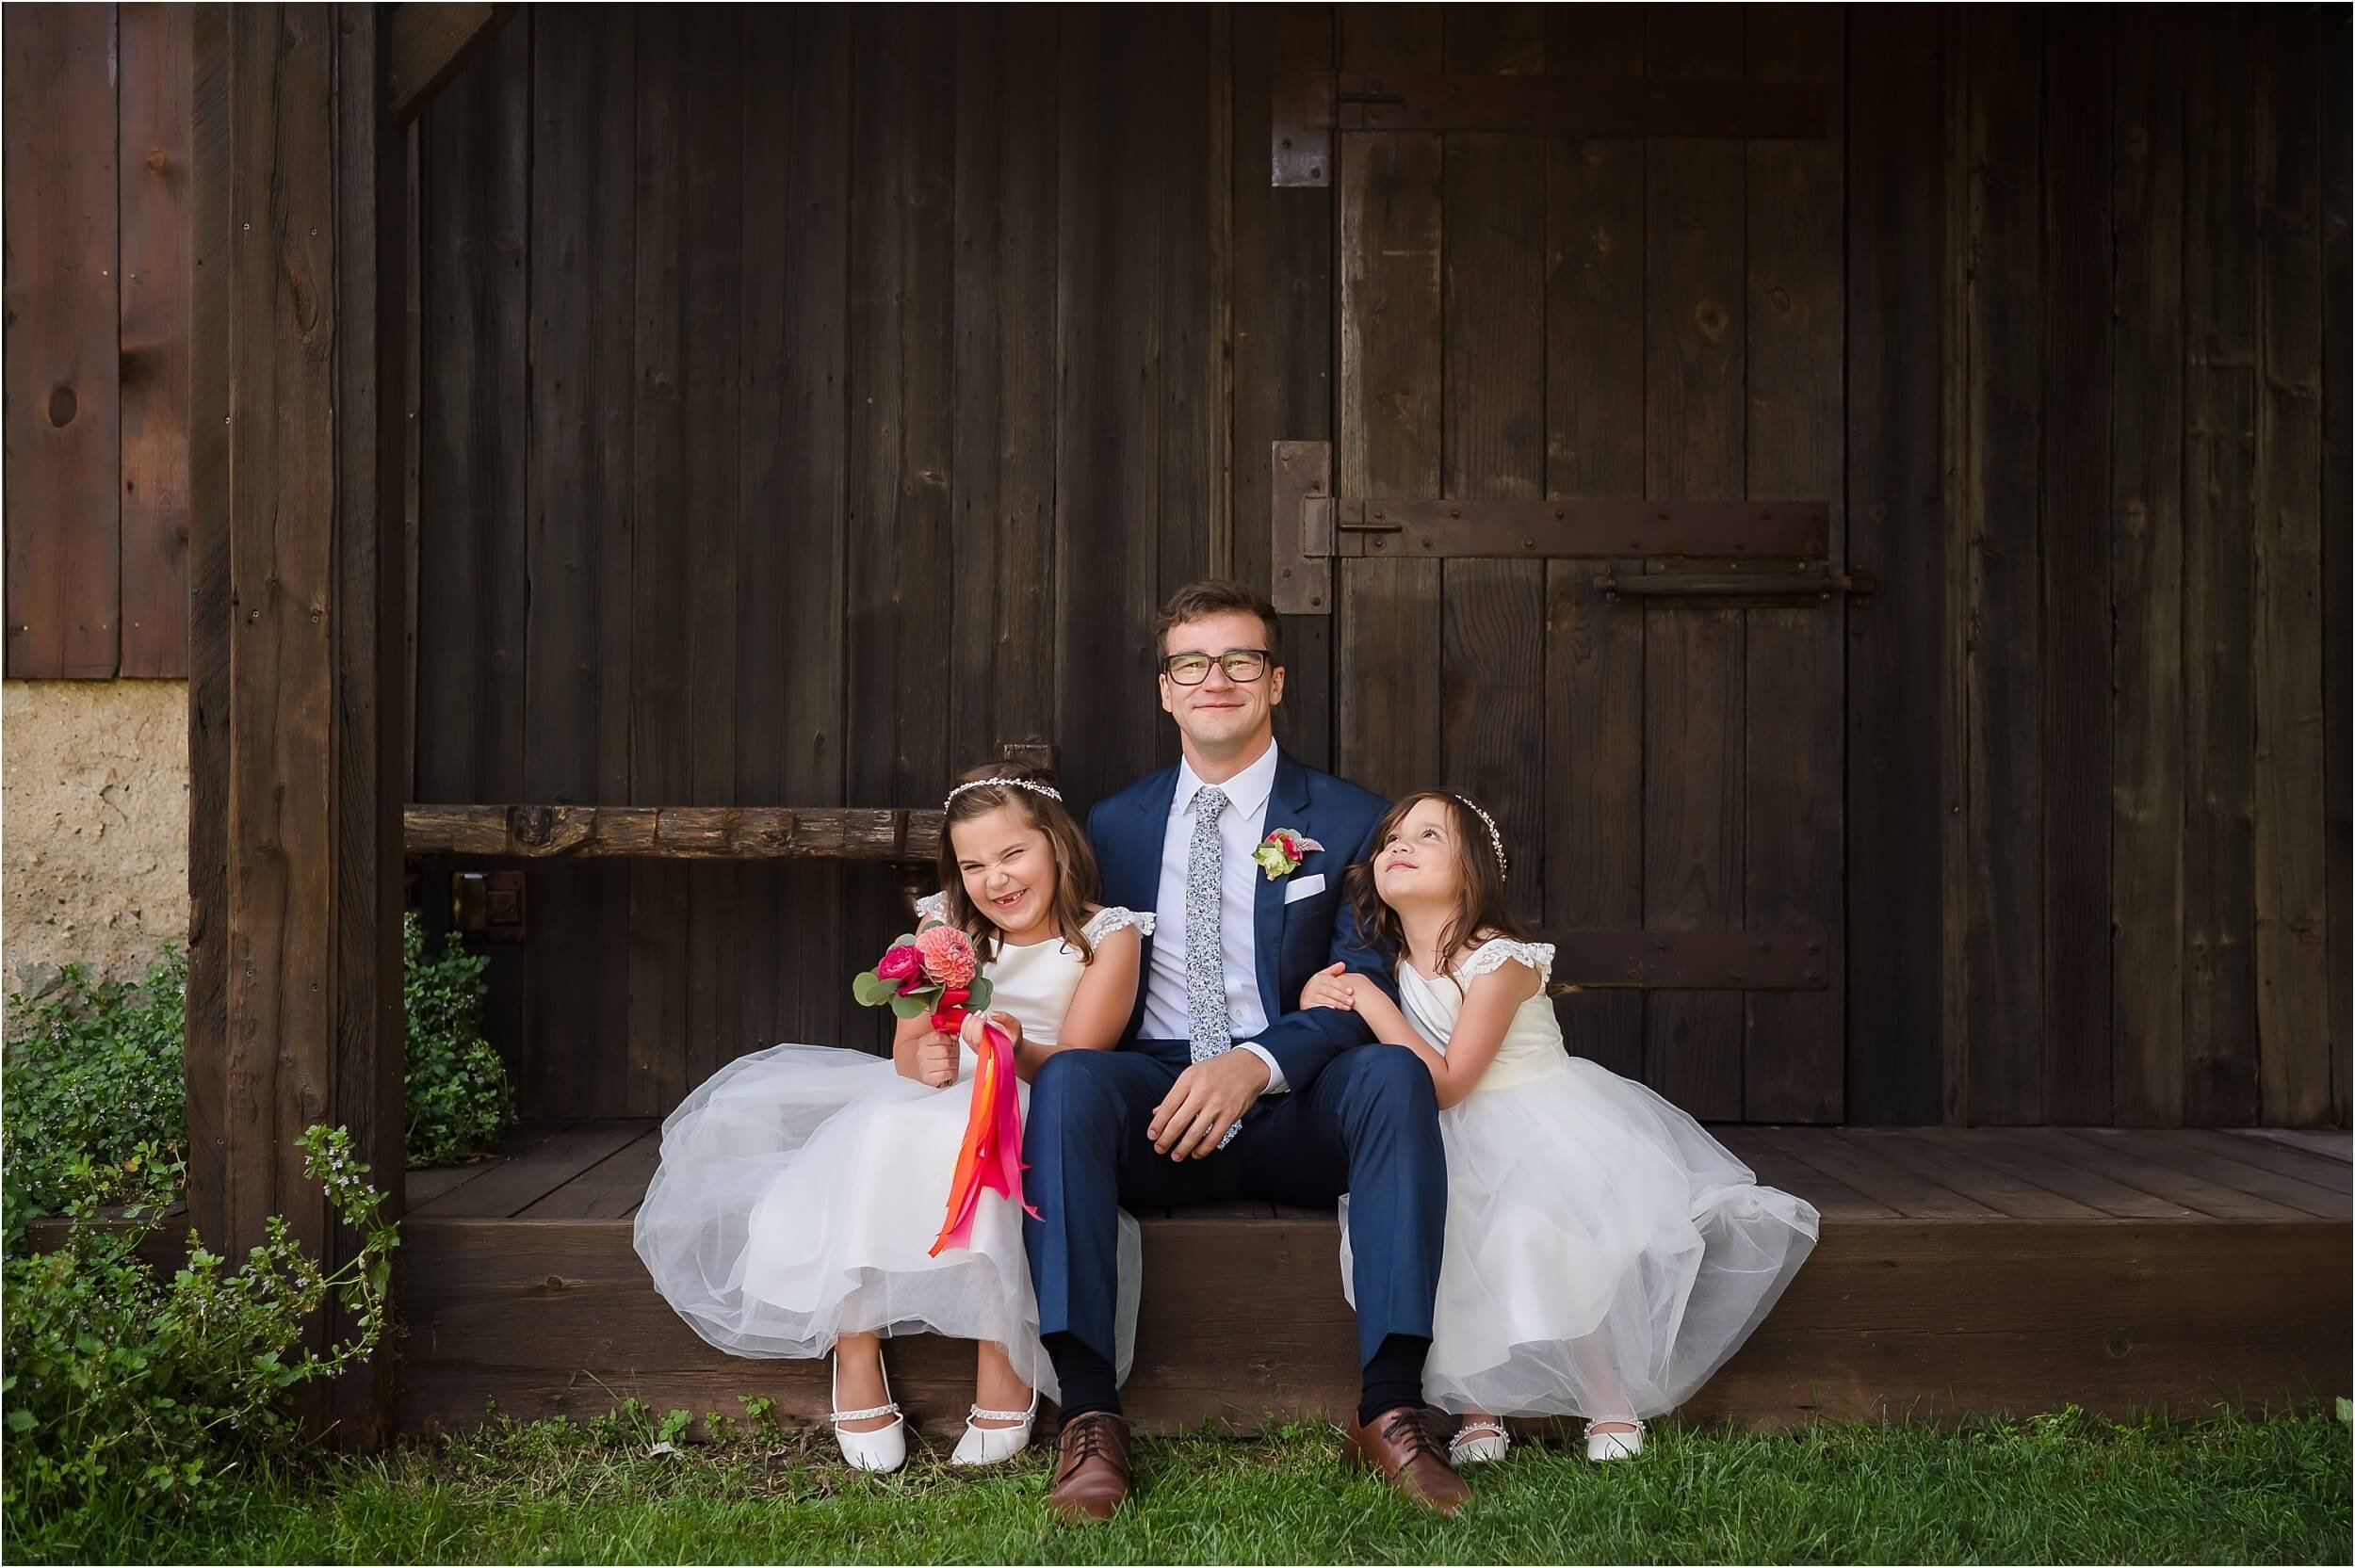  Two flower girls, who are nieces of the groom, hang out with the groom in between portraits.  